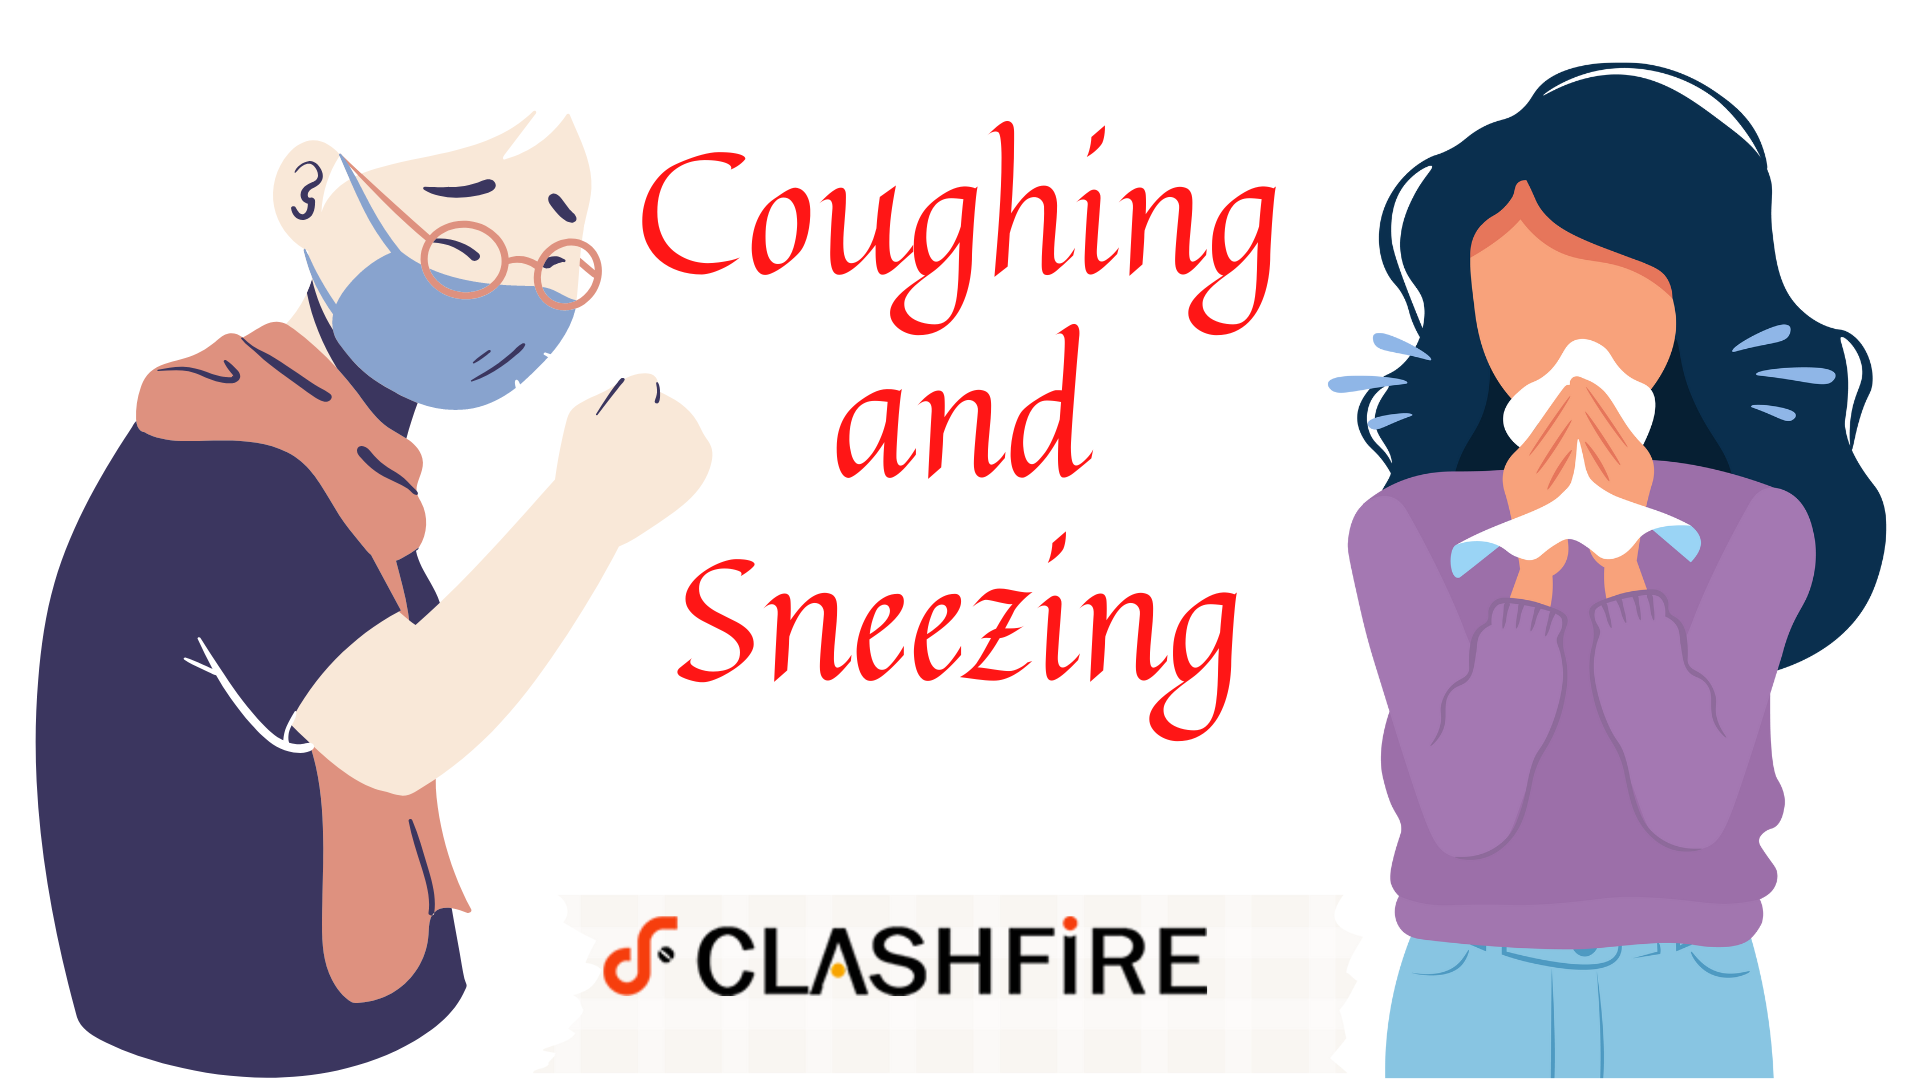 Diseases Spread by Coughing and Sneezing 2